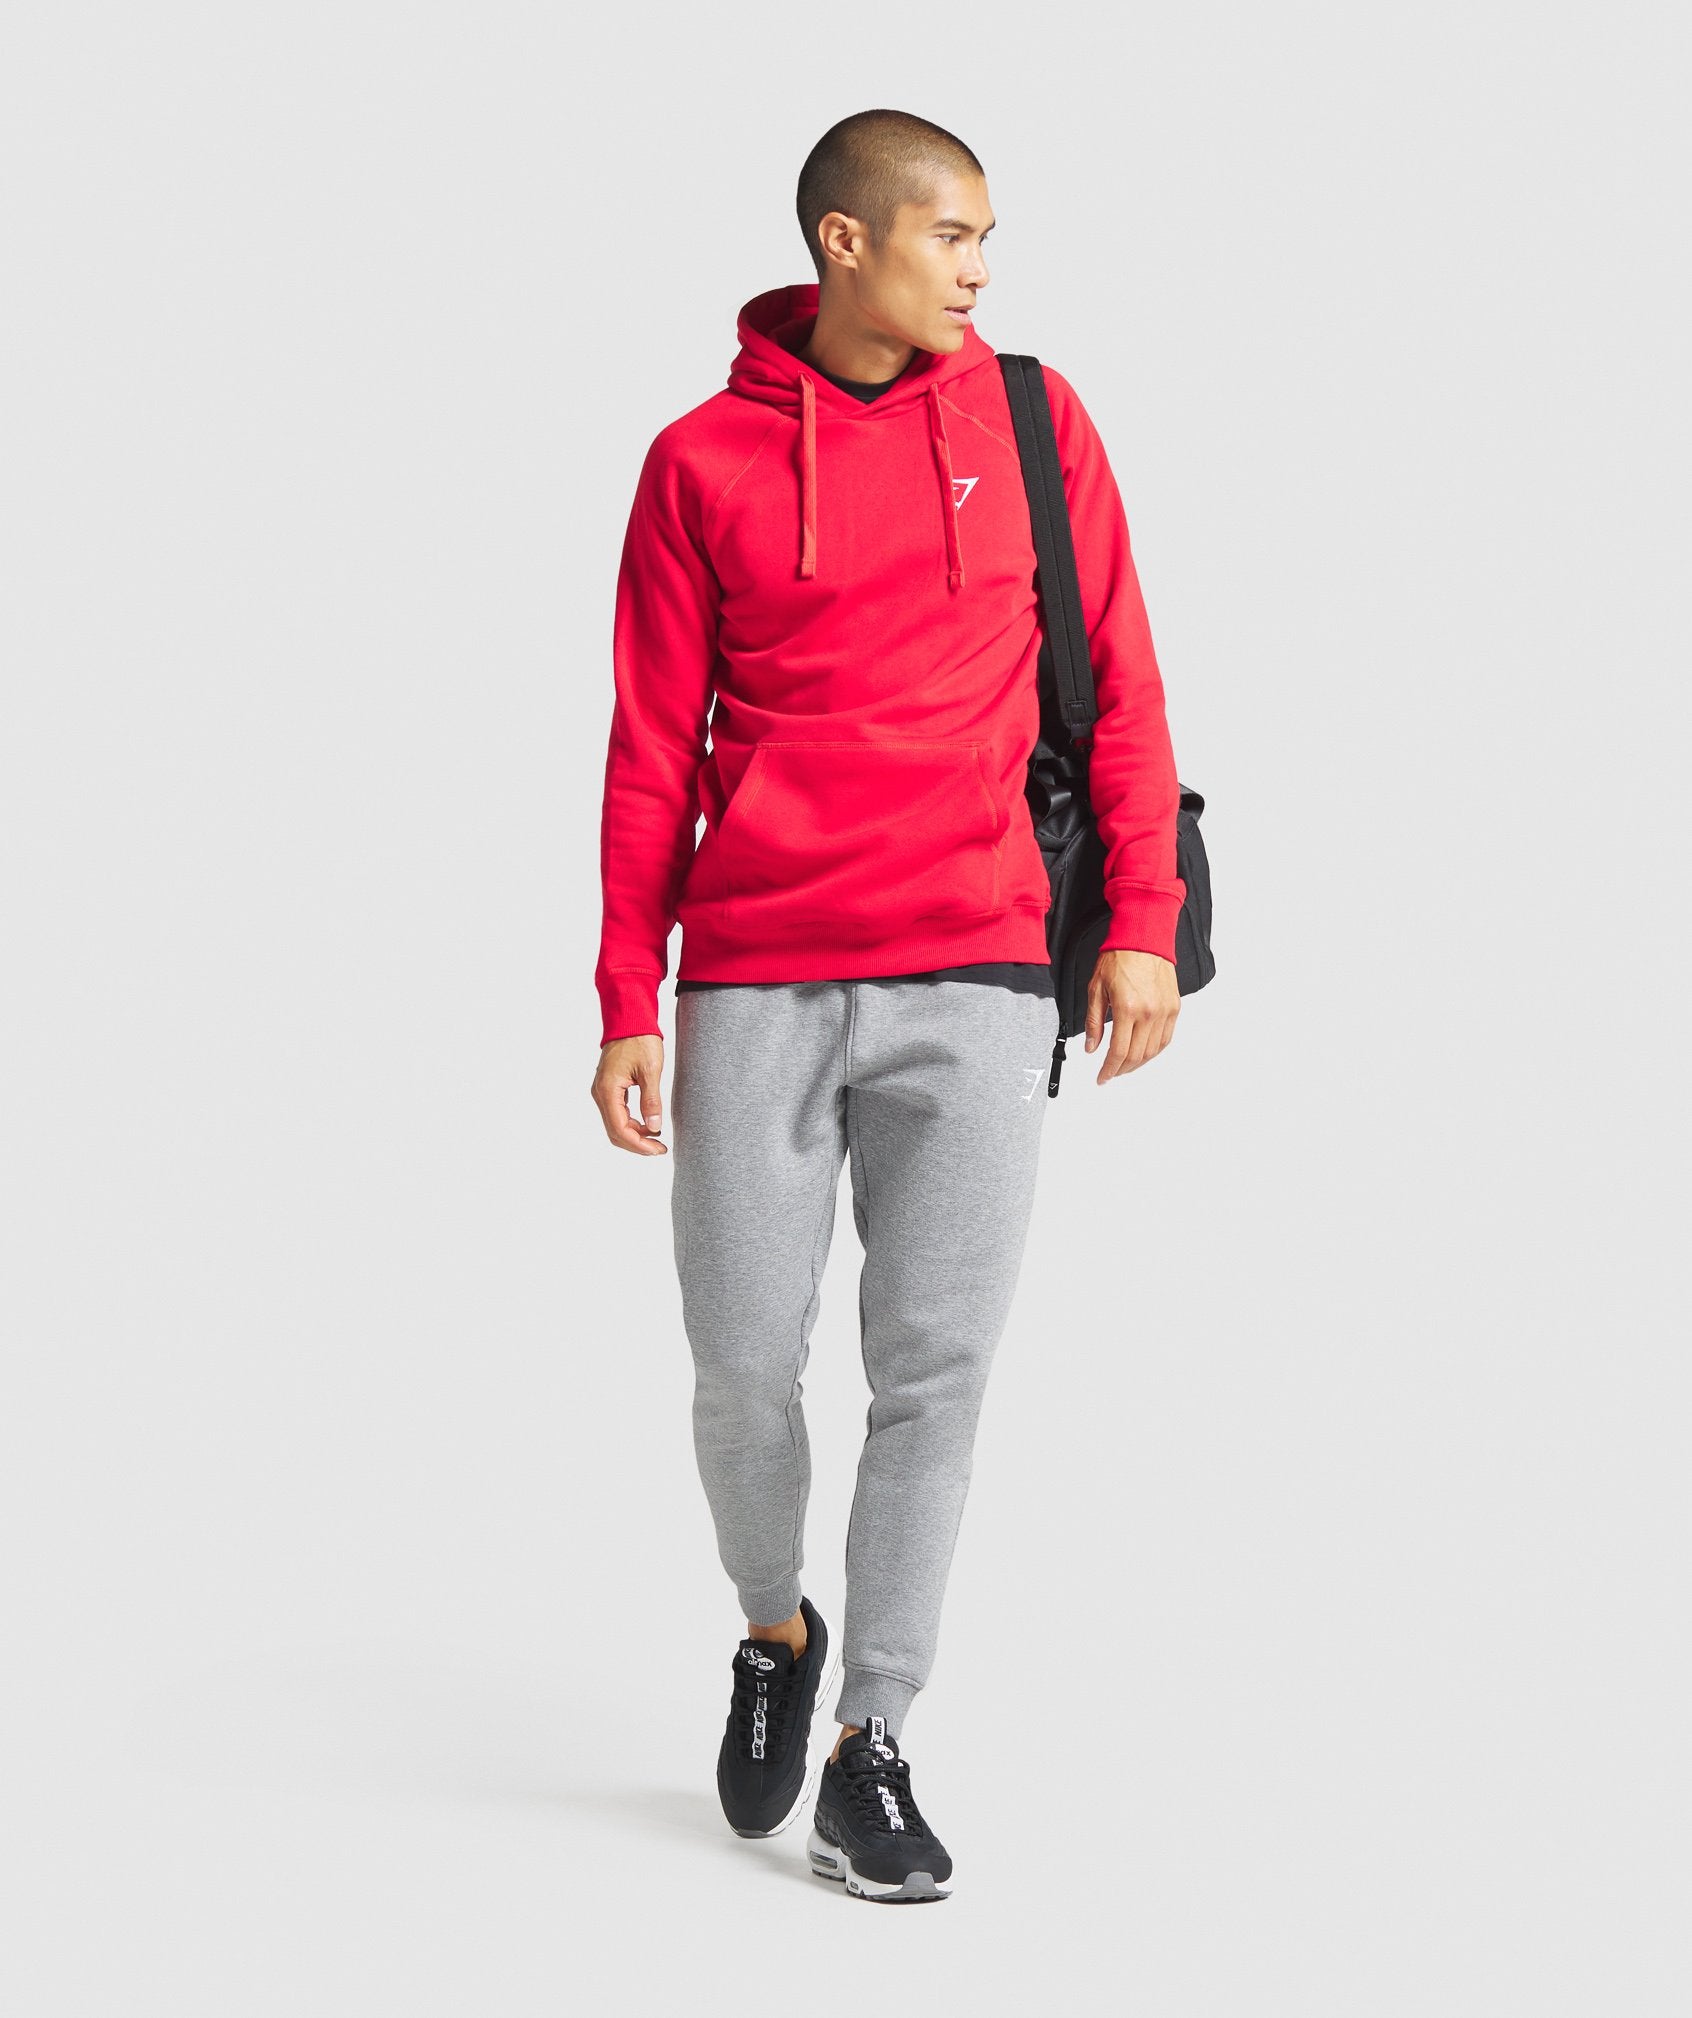 Crest Hoodie in Red - view 5